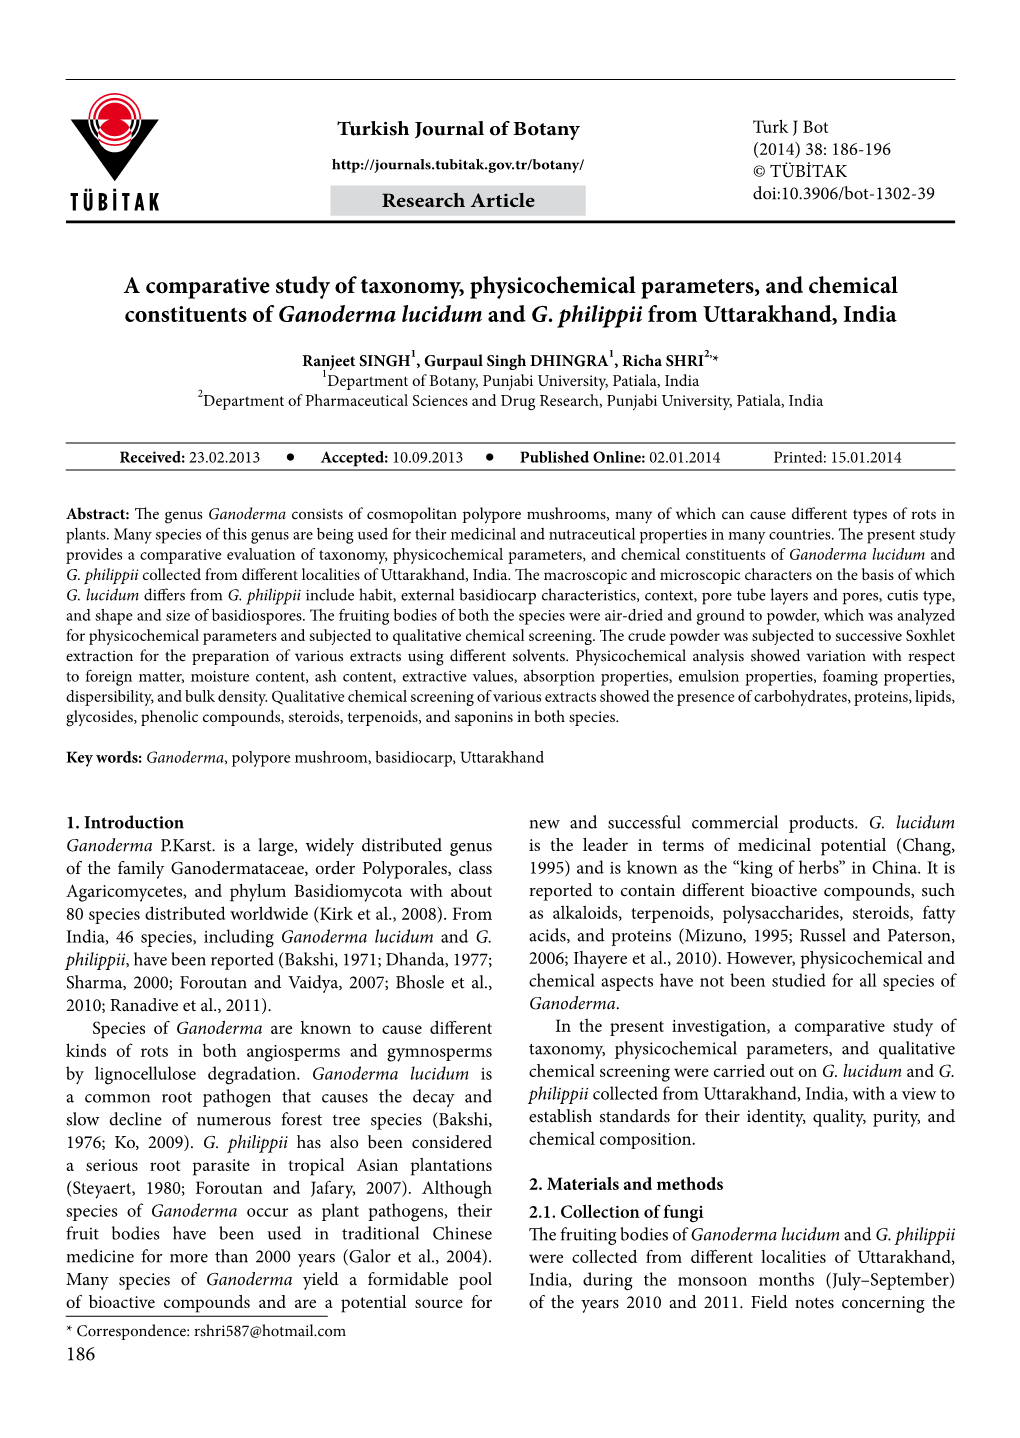 A Comparative Study of Taxonomy, Physicochemical Parameters, and Chemical Constituents of Ganoderma Lucidum and G. Philippii from Uttarakhand, India